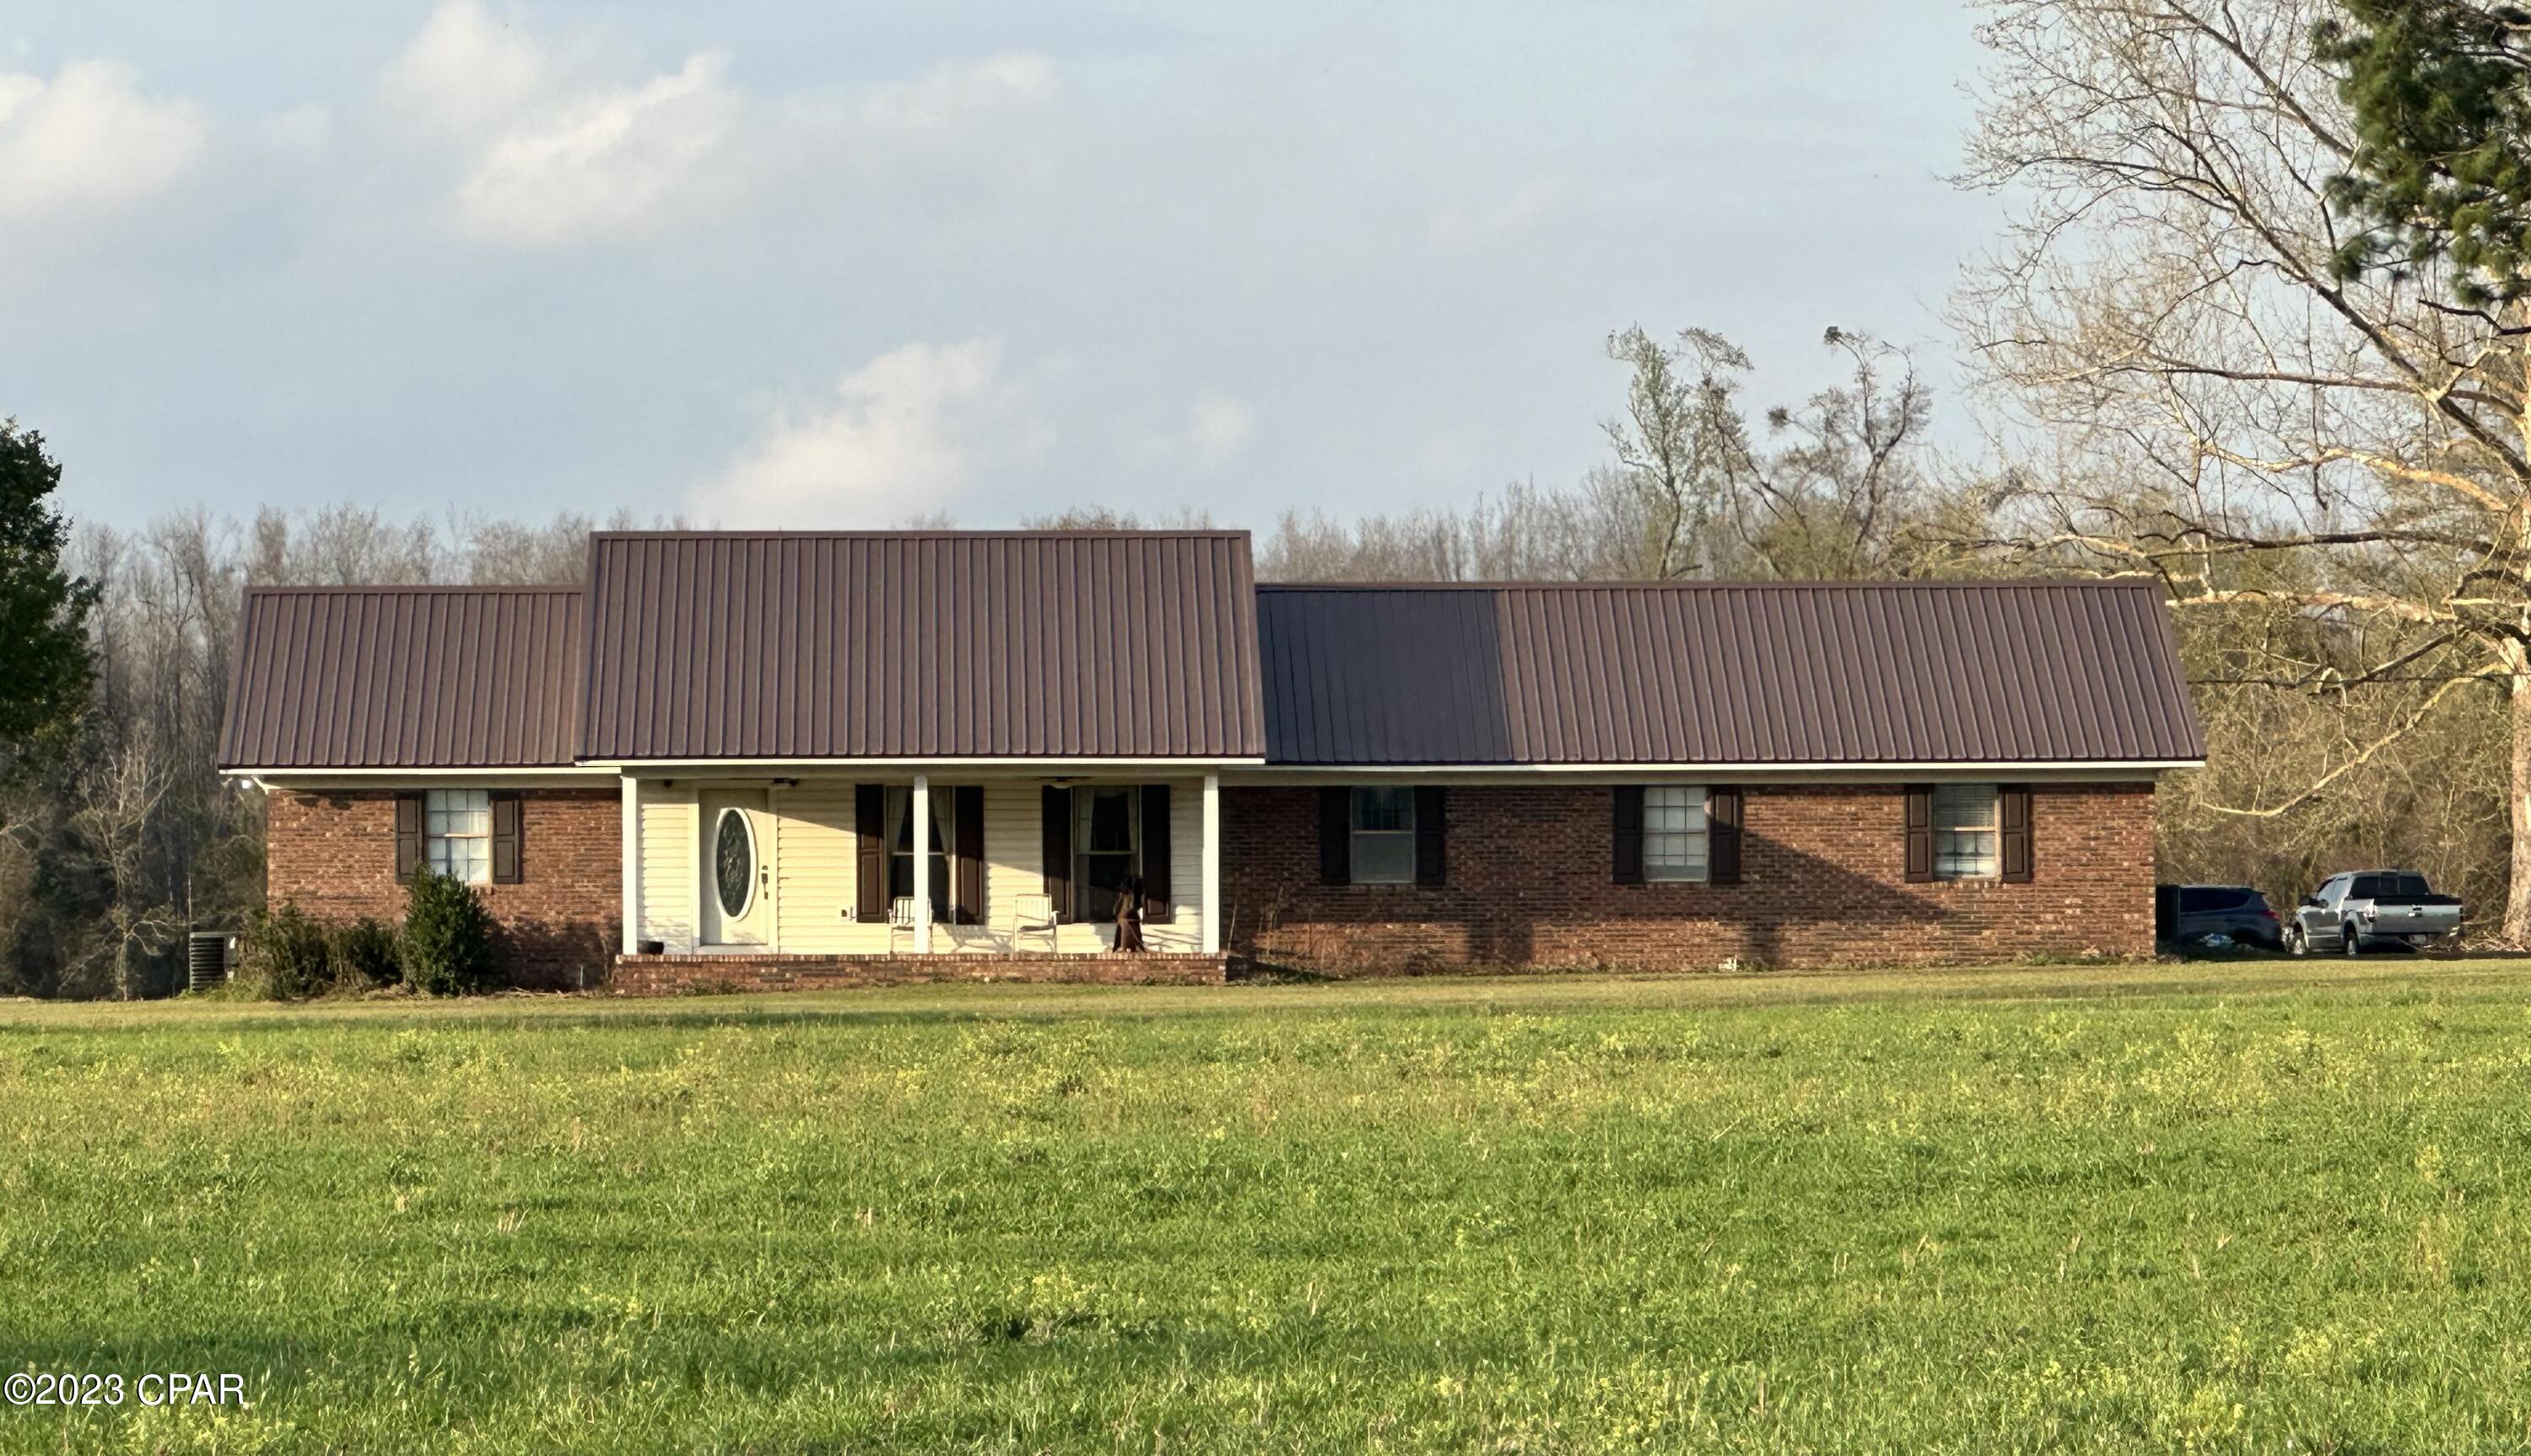 Beautiful Farm House!! 3 BR/2.5 BA with 2 offices and 61 acres with tons of Highway frontage on Highway 90, centered perfectly between Grand Ridge and Sneads!The main part of the home heated and cooled is 2,808 sq ft. With a 10x20 Heated and cooled Office at end of carport.The house has an attached 3 bay carport, a nice 12x24 screened back porch and a wood burning fireplace in the living room.There is a 1/4 mile long paved asphalt driveway to get to the house and Barndominium. The home has a new metal roof in 2019! Also, new are dual HVAC units that control each end of the home! New engineered hardwood flooring 2020! New tile flooring & tile shower in master bath!**See supplemental notes for more info on this listing***